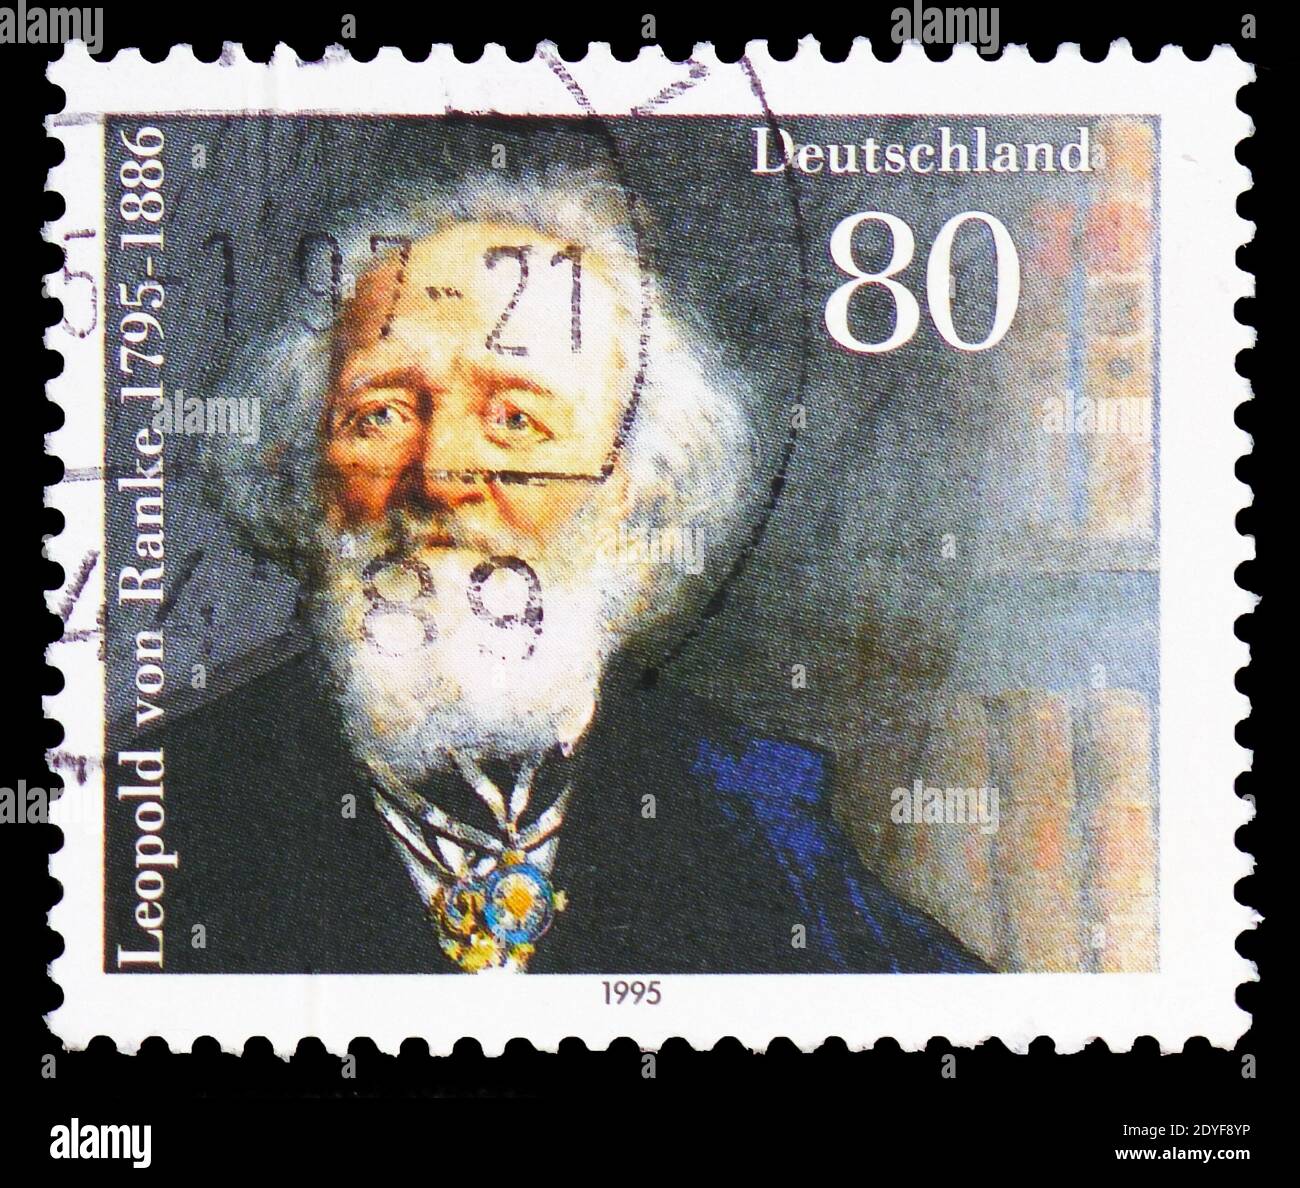 MOSCOW, RUSSIA - FEBRUARY 22, 2019: A stamp printed in Germany, Federal Republic shows Leopold von Ranke (1795-1886), historian, Birth Bicentenary ser Stock Photo